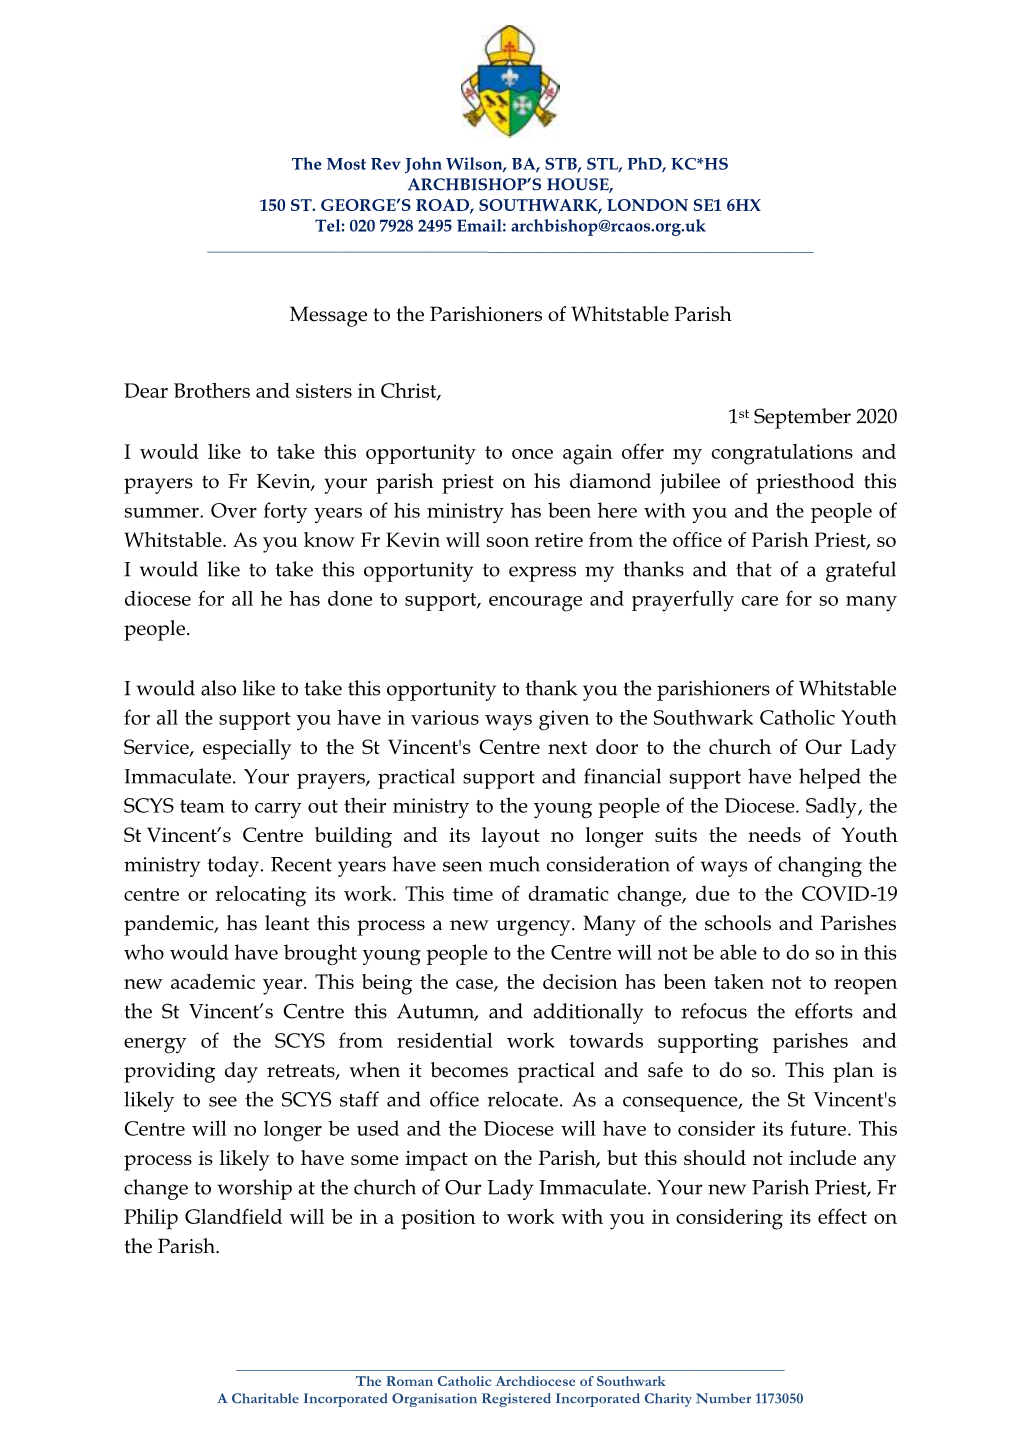 Message from Archbishop John Wilson to the Parish of Whitstable